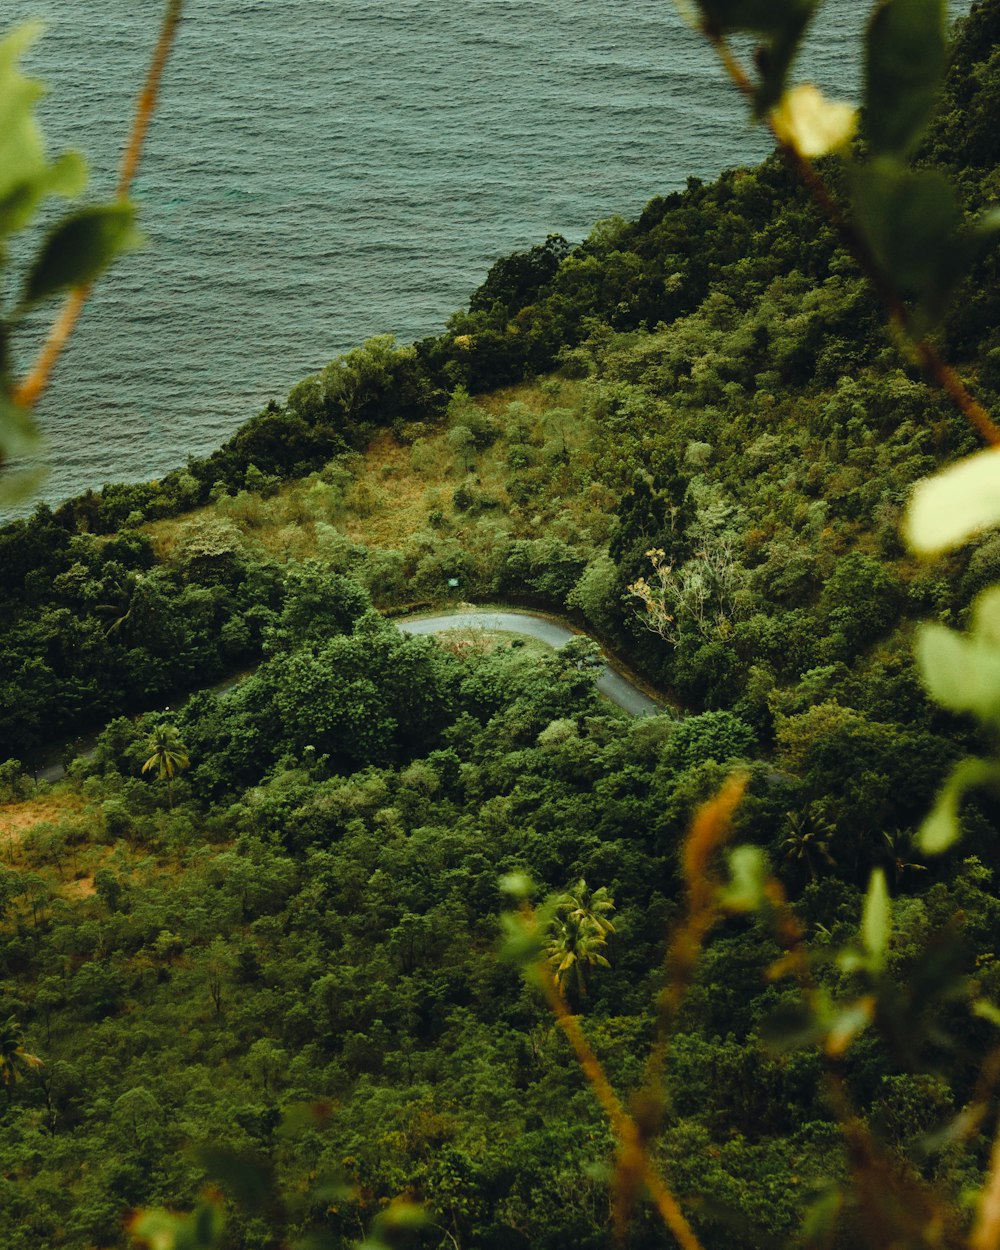 a winding road on the side of a hill next to a body of water